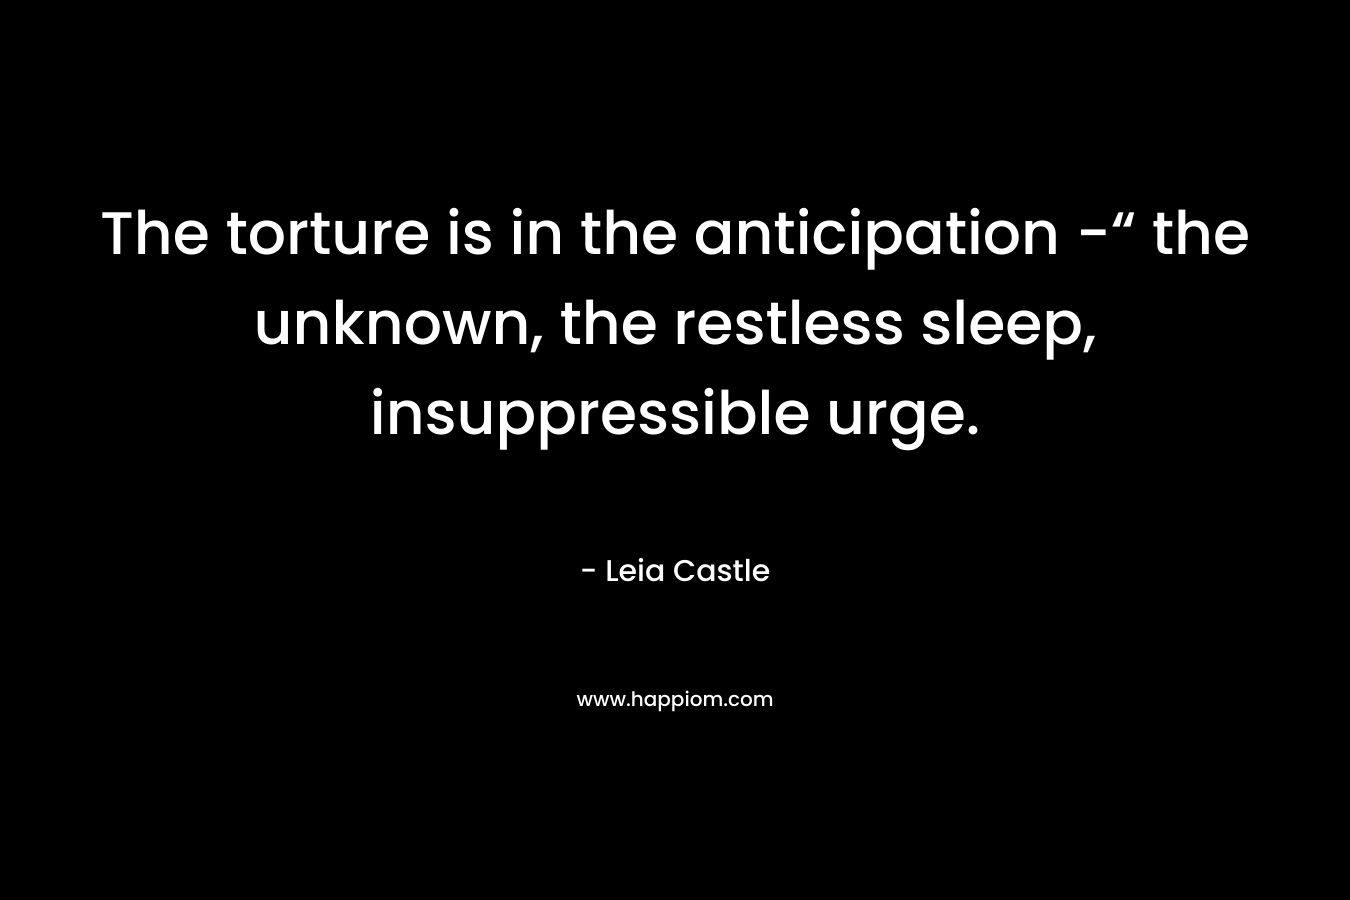 The torture is in the anticipation -“ the unknown, the restless sleep, insuppressible urge. – Leia Castle